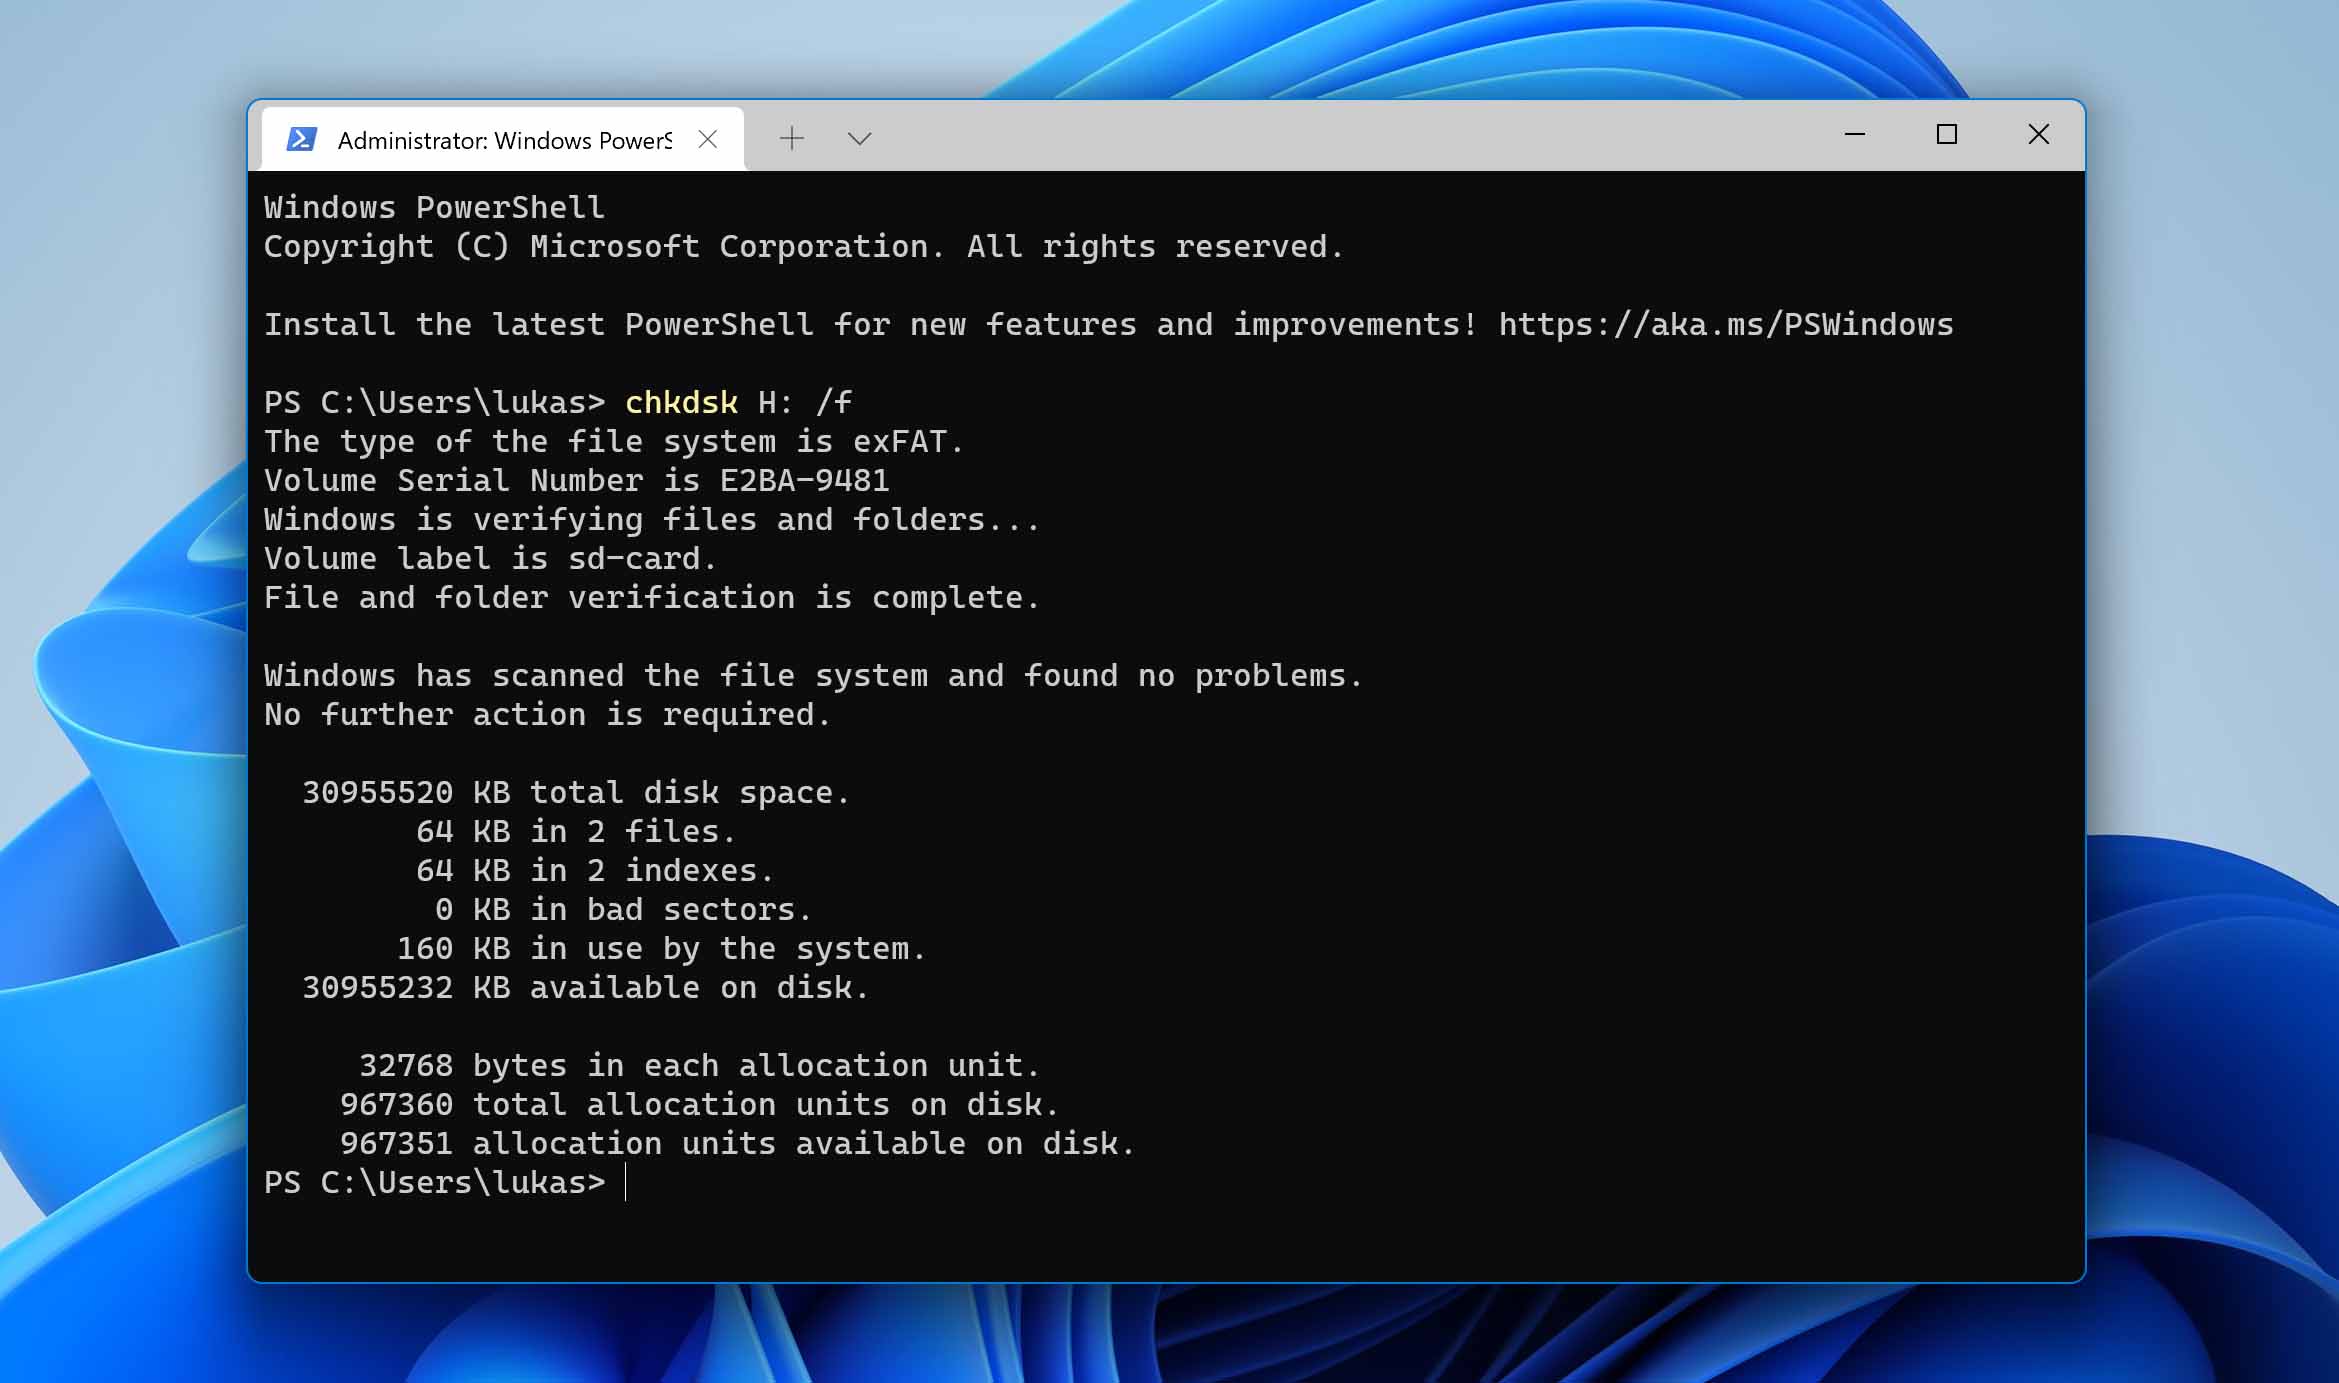 chkdsk command to recover data from an external drive